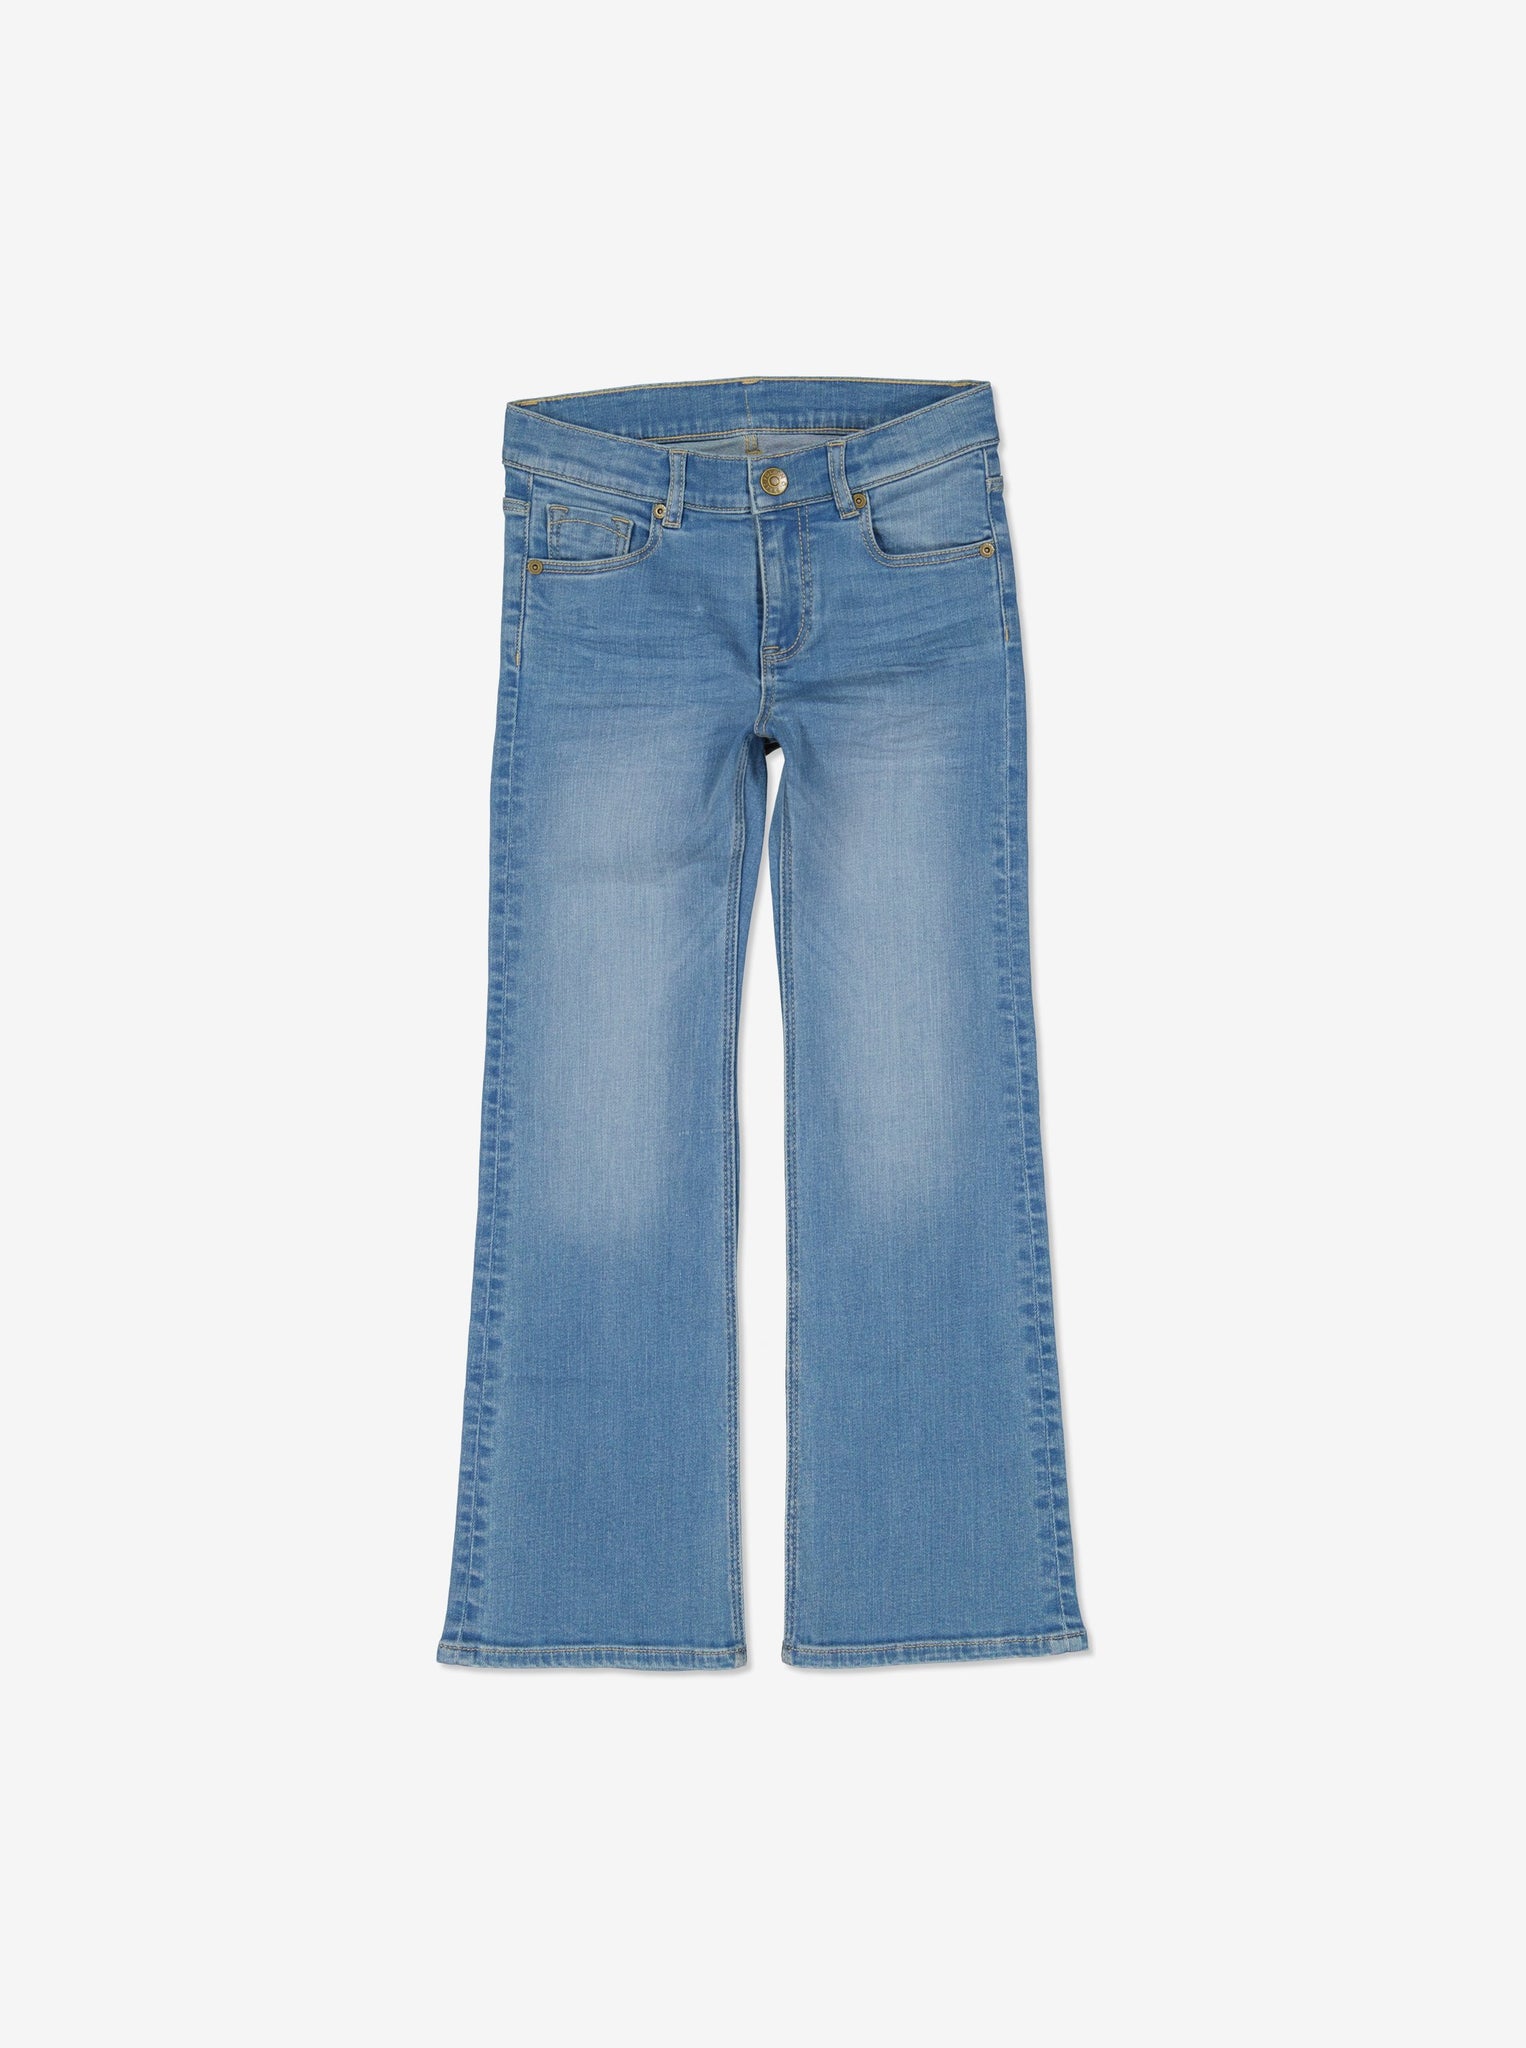  Durable  Kids Light Denim Jeans from Polarn O. Pyret Kidswear. Made from environmentally friendly materials.